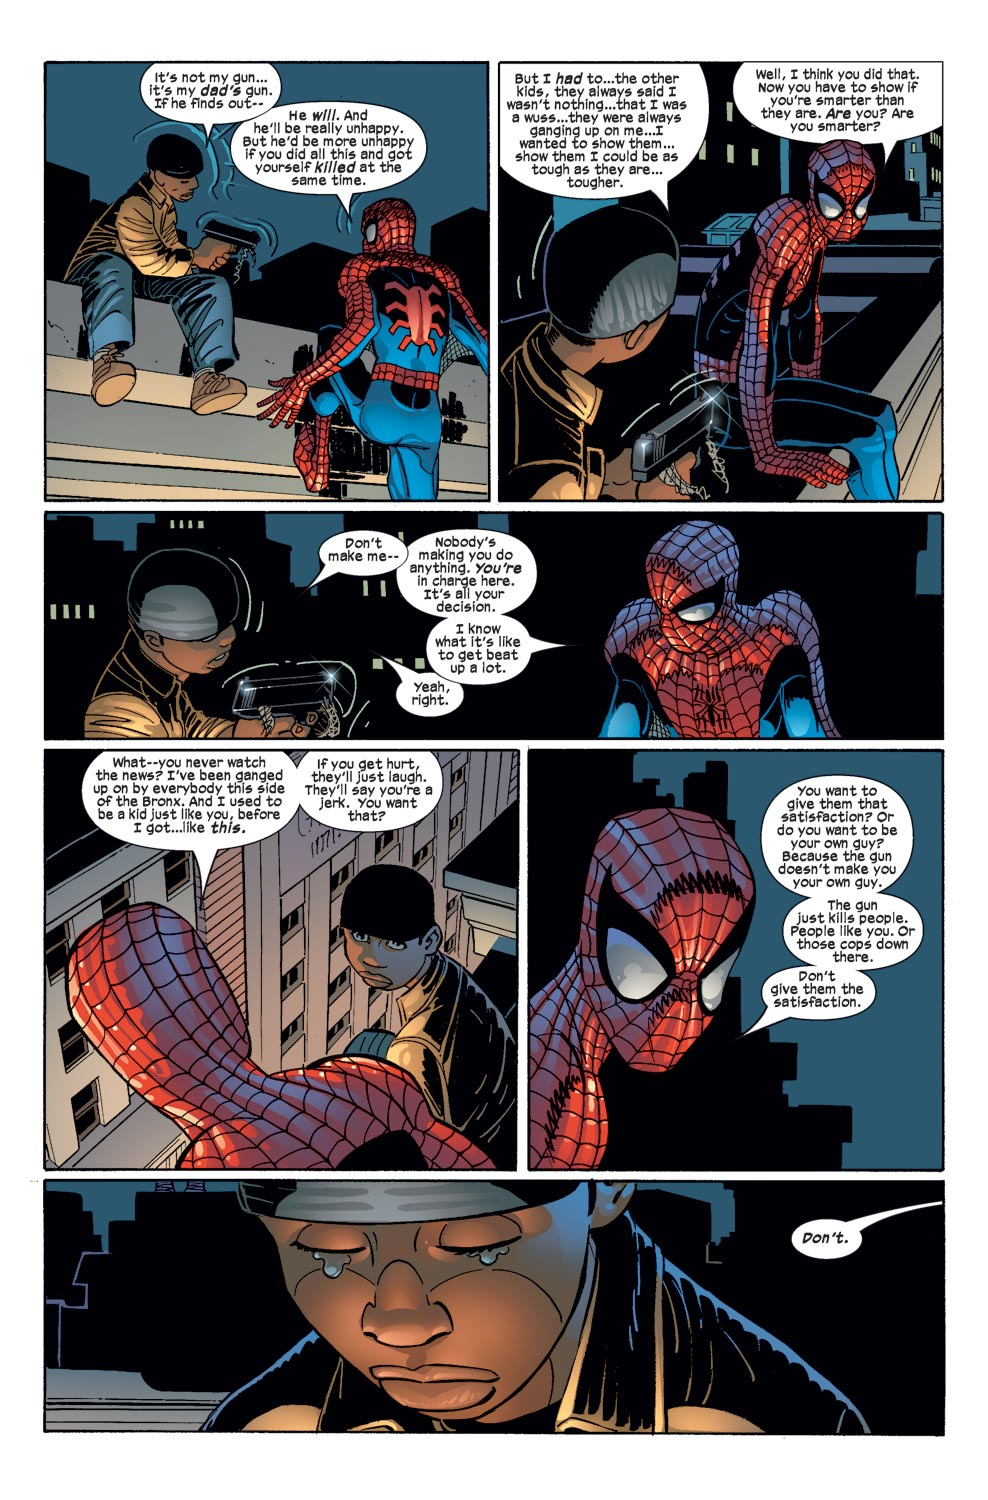 Spider-man Talks To A 12 Year Old With A Gun 